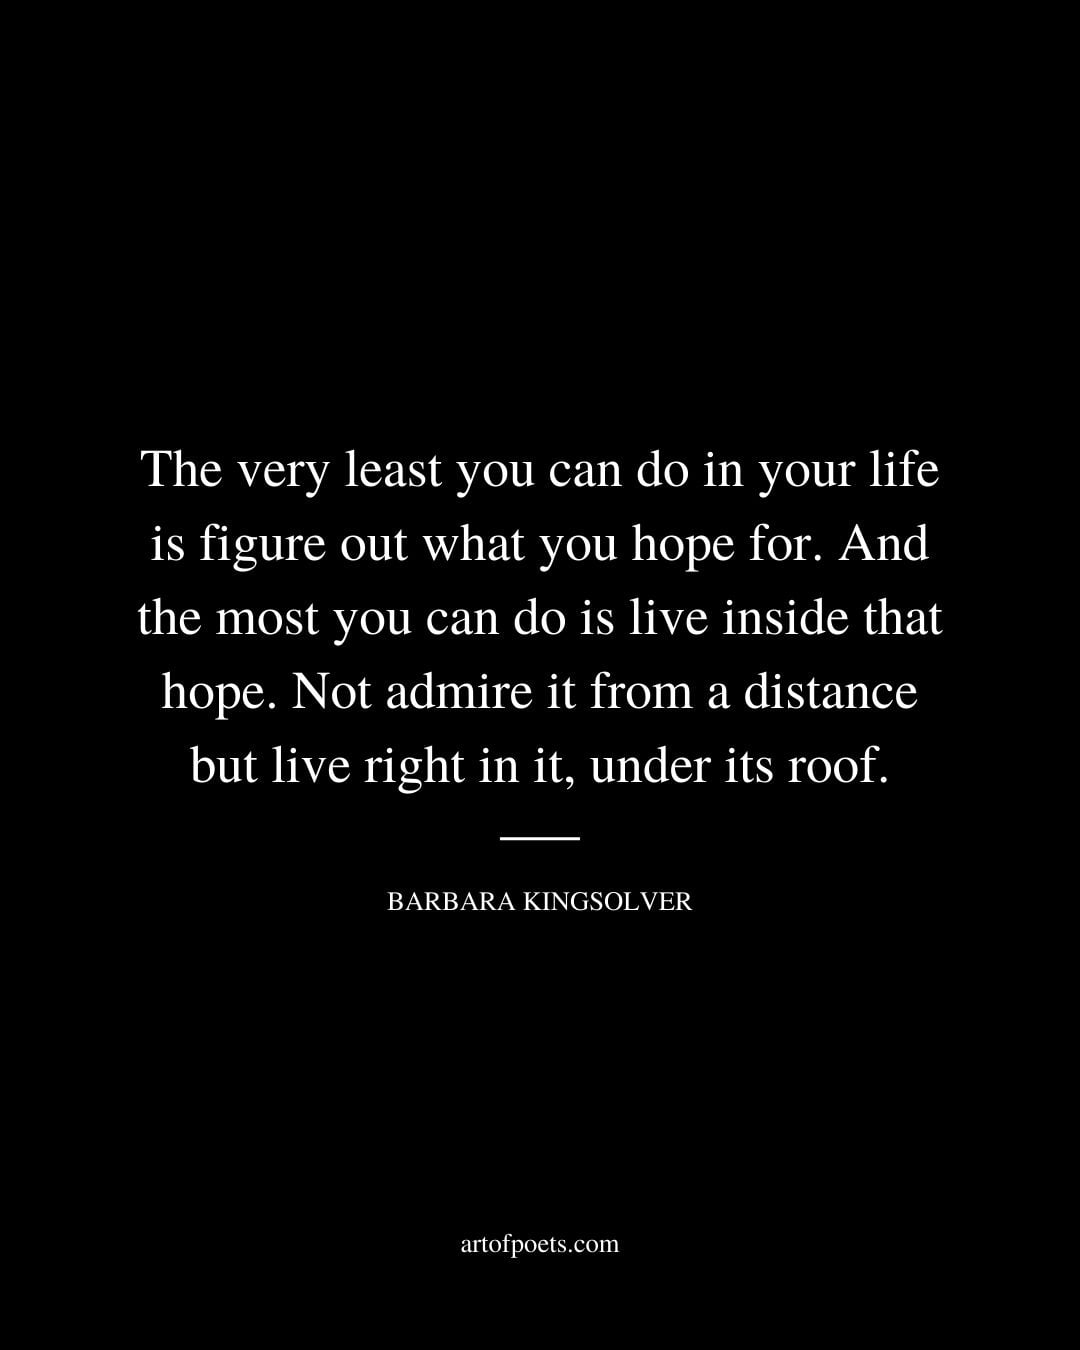 The very least you can do in your life is figure out what you hope for. And the most you can do is live inside that hope